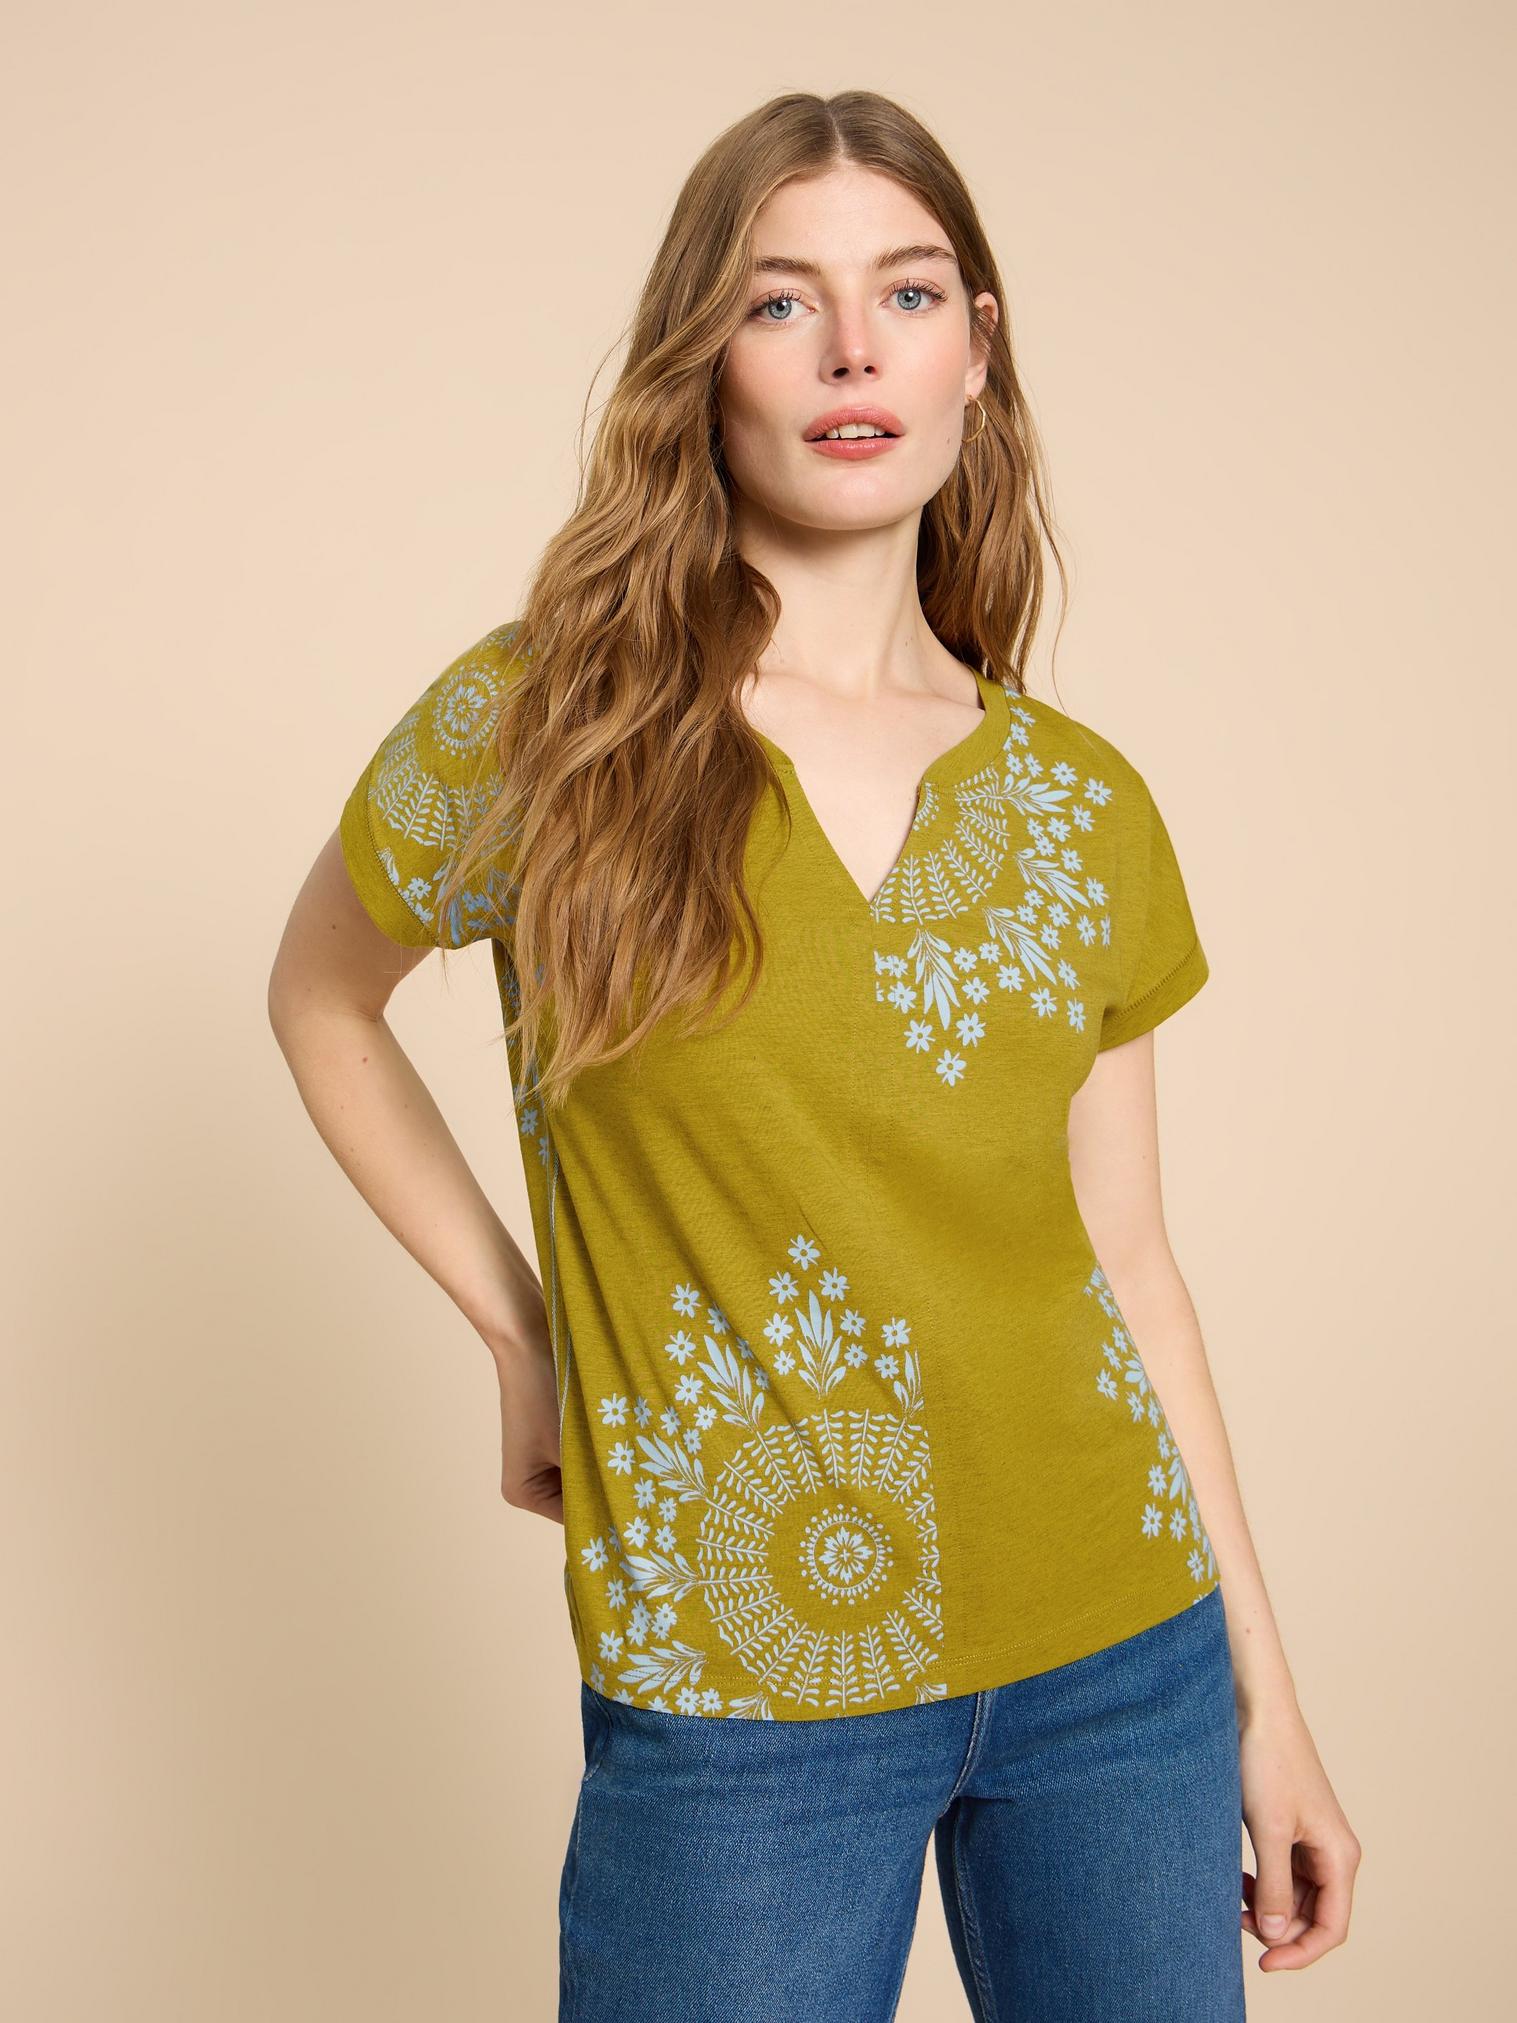 NELLY NOTCH NECK COTTON TEE in CHART PR - LIFESTYLE